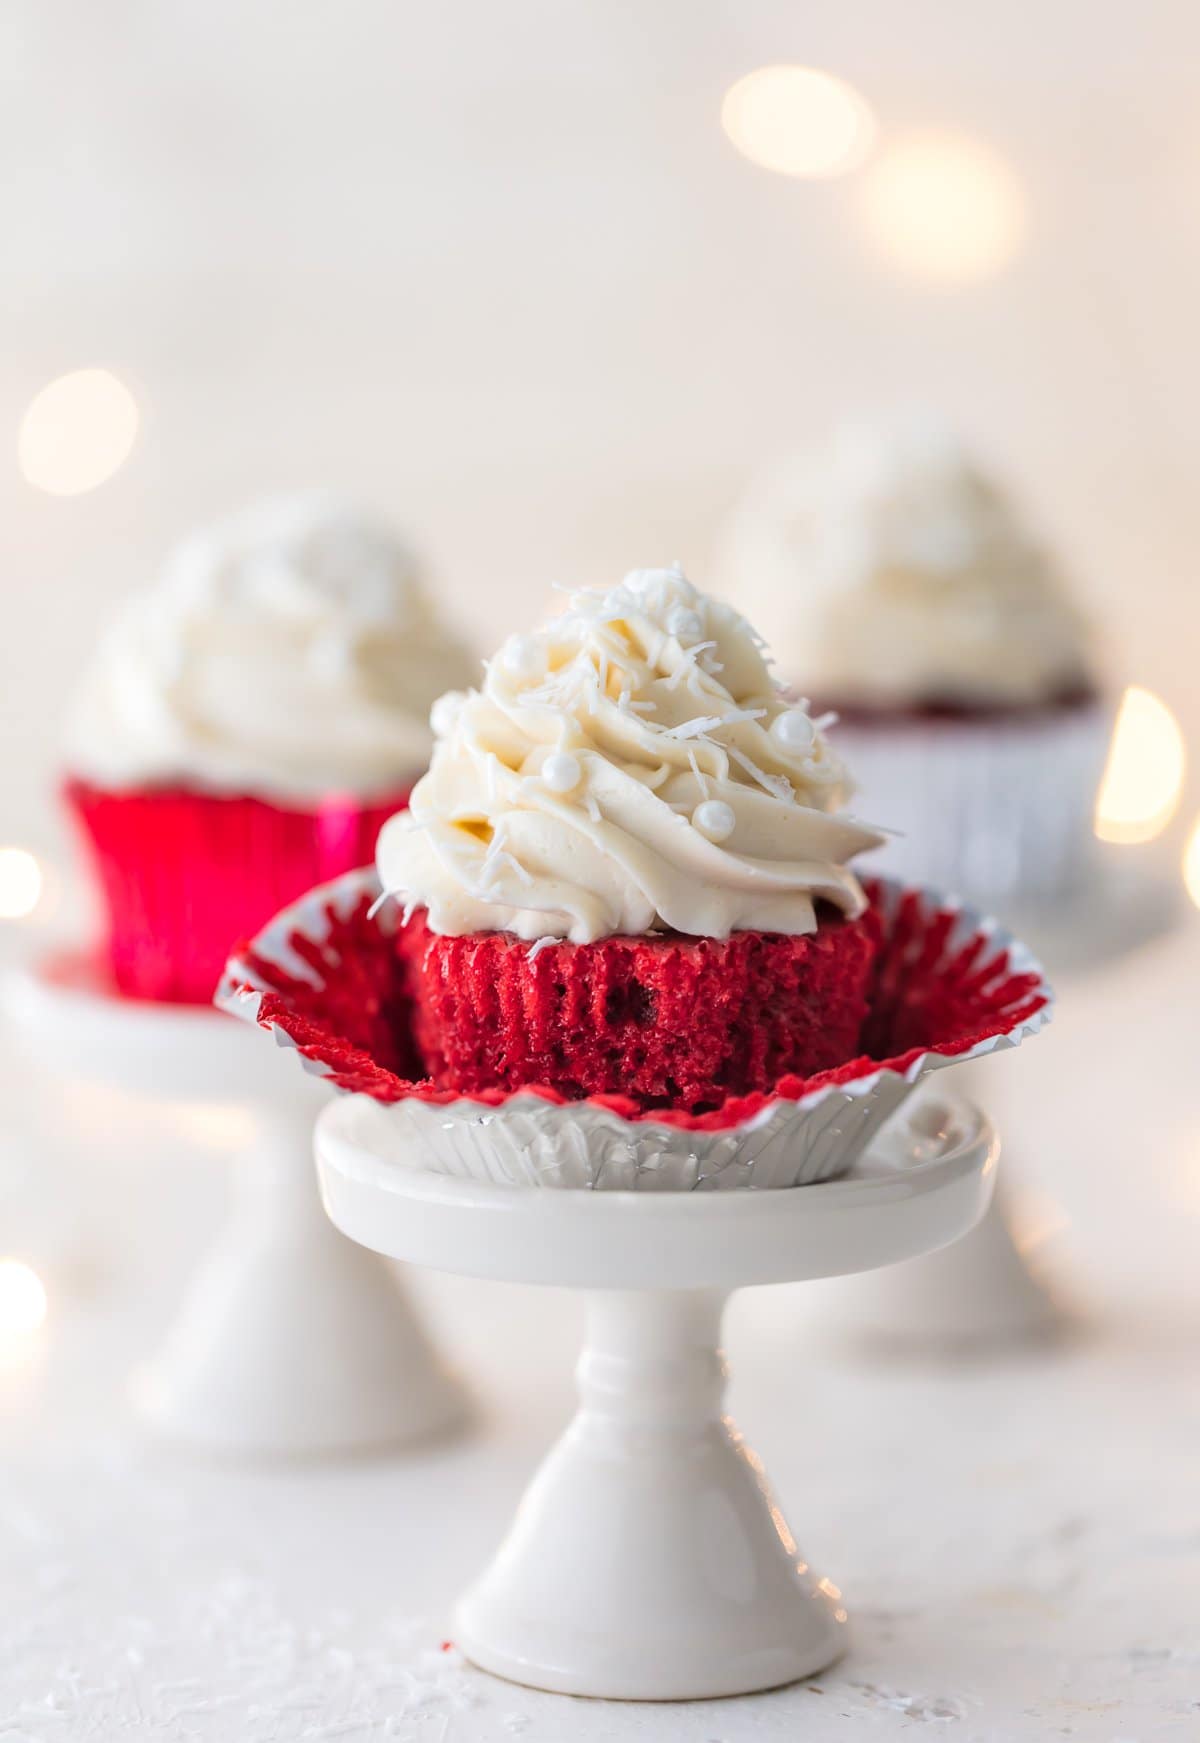 PERFECT RED VELVET CUPCAKES are the ultimate holiday dessert! You haven't lived unless you've tried these classic cupcakes with the most amazing cream cheese icing! Classic, delicious, and perfect.